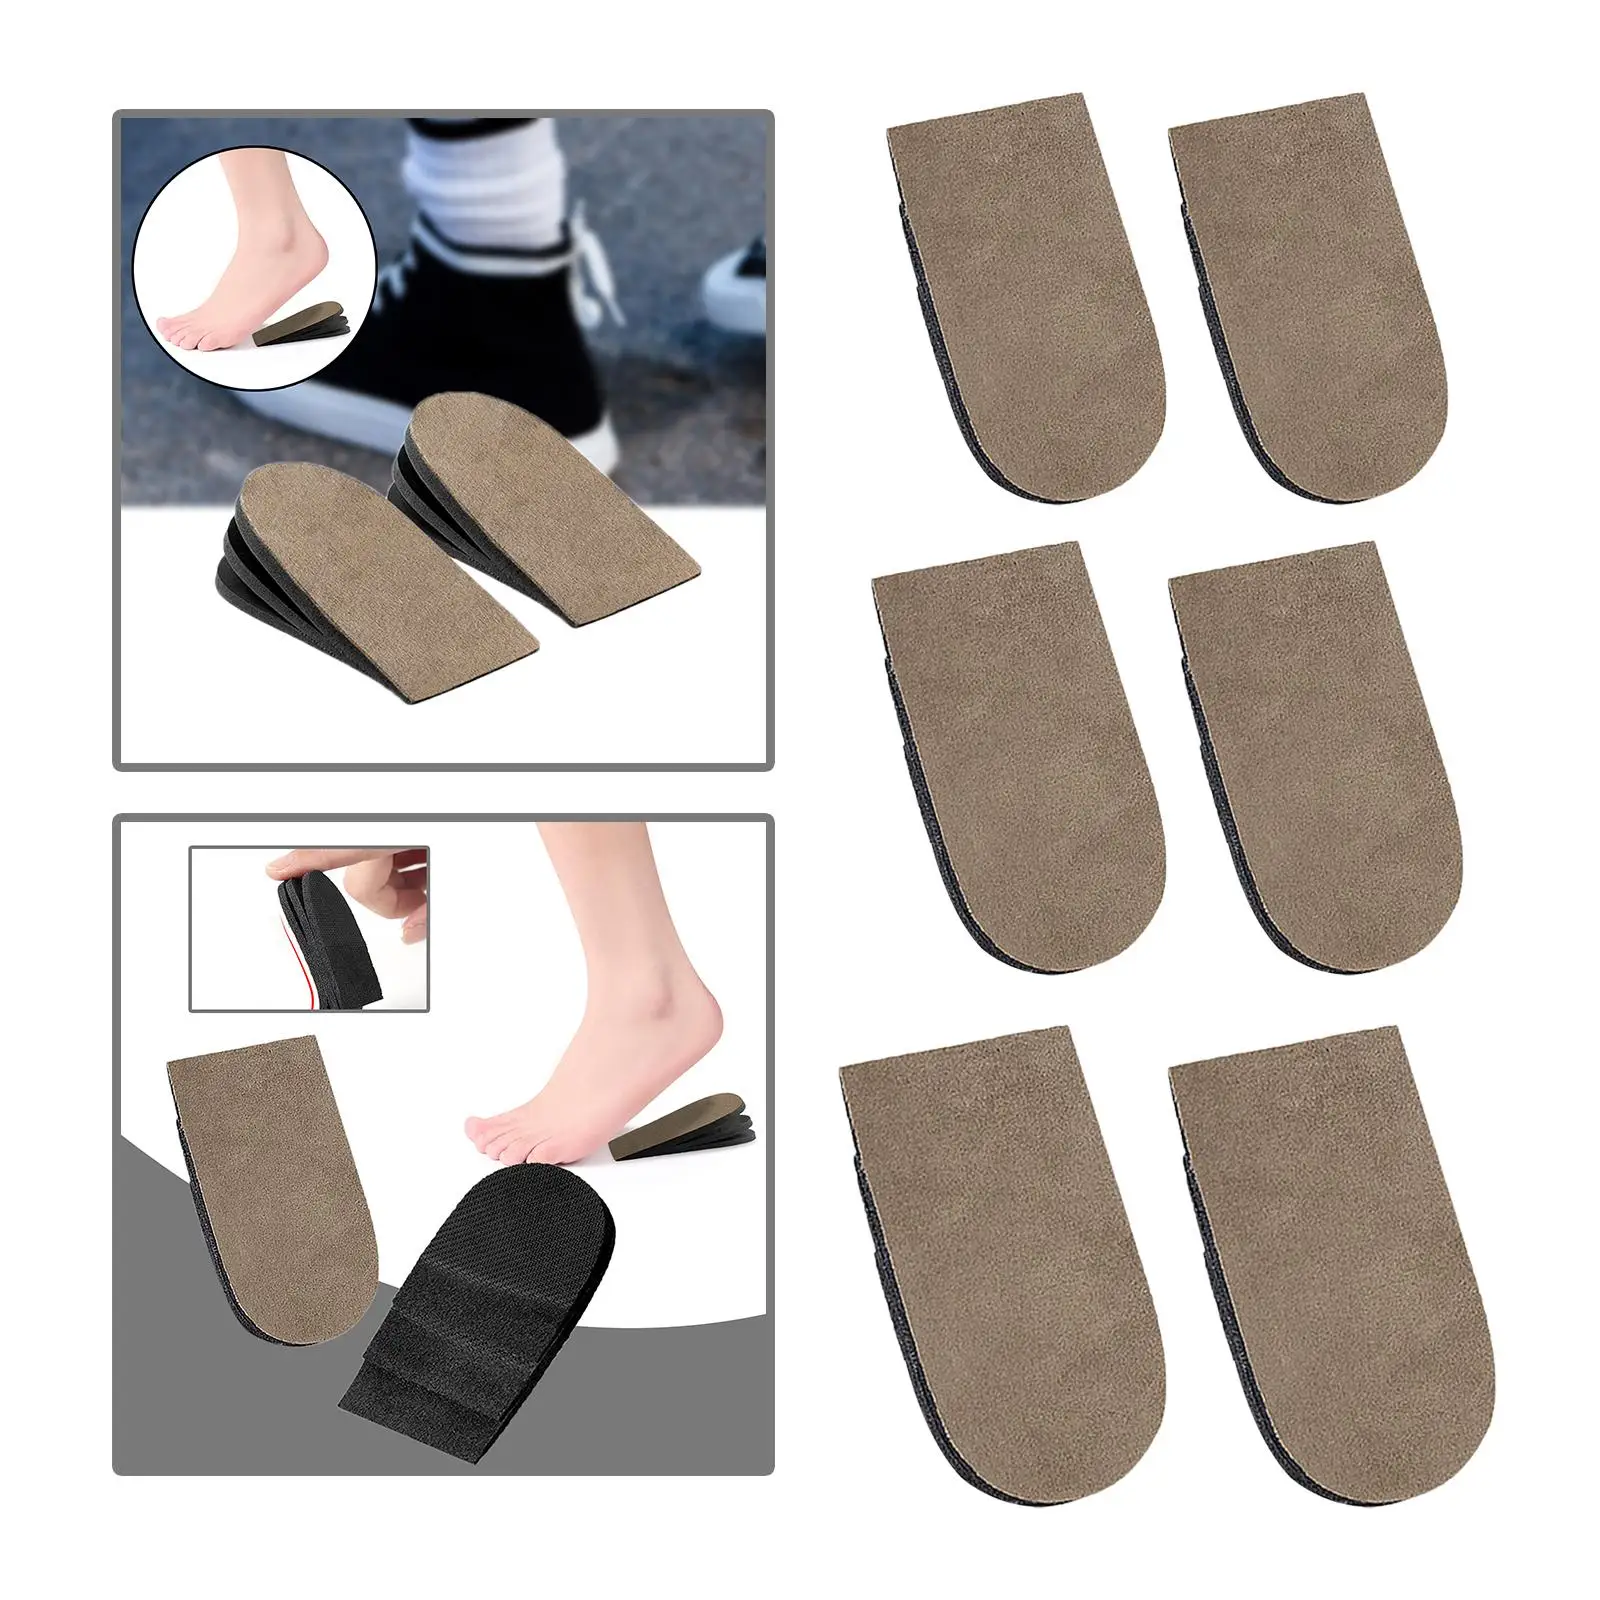 1 Pair Height Increase Insoles adjustable Shock Absorption Shoe Lifts Elevator Heel Cushion Inserts for Men Women Unisex